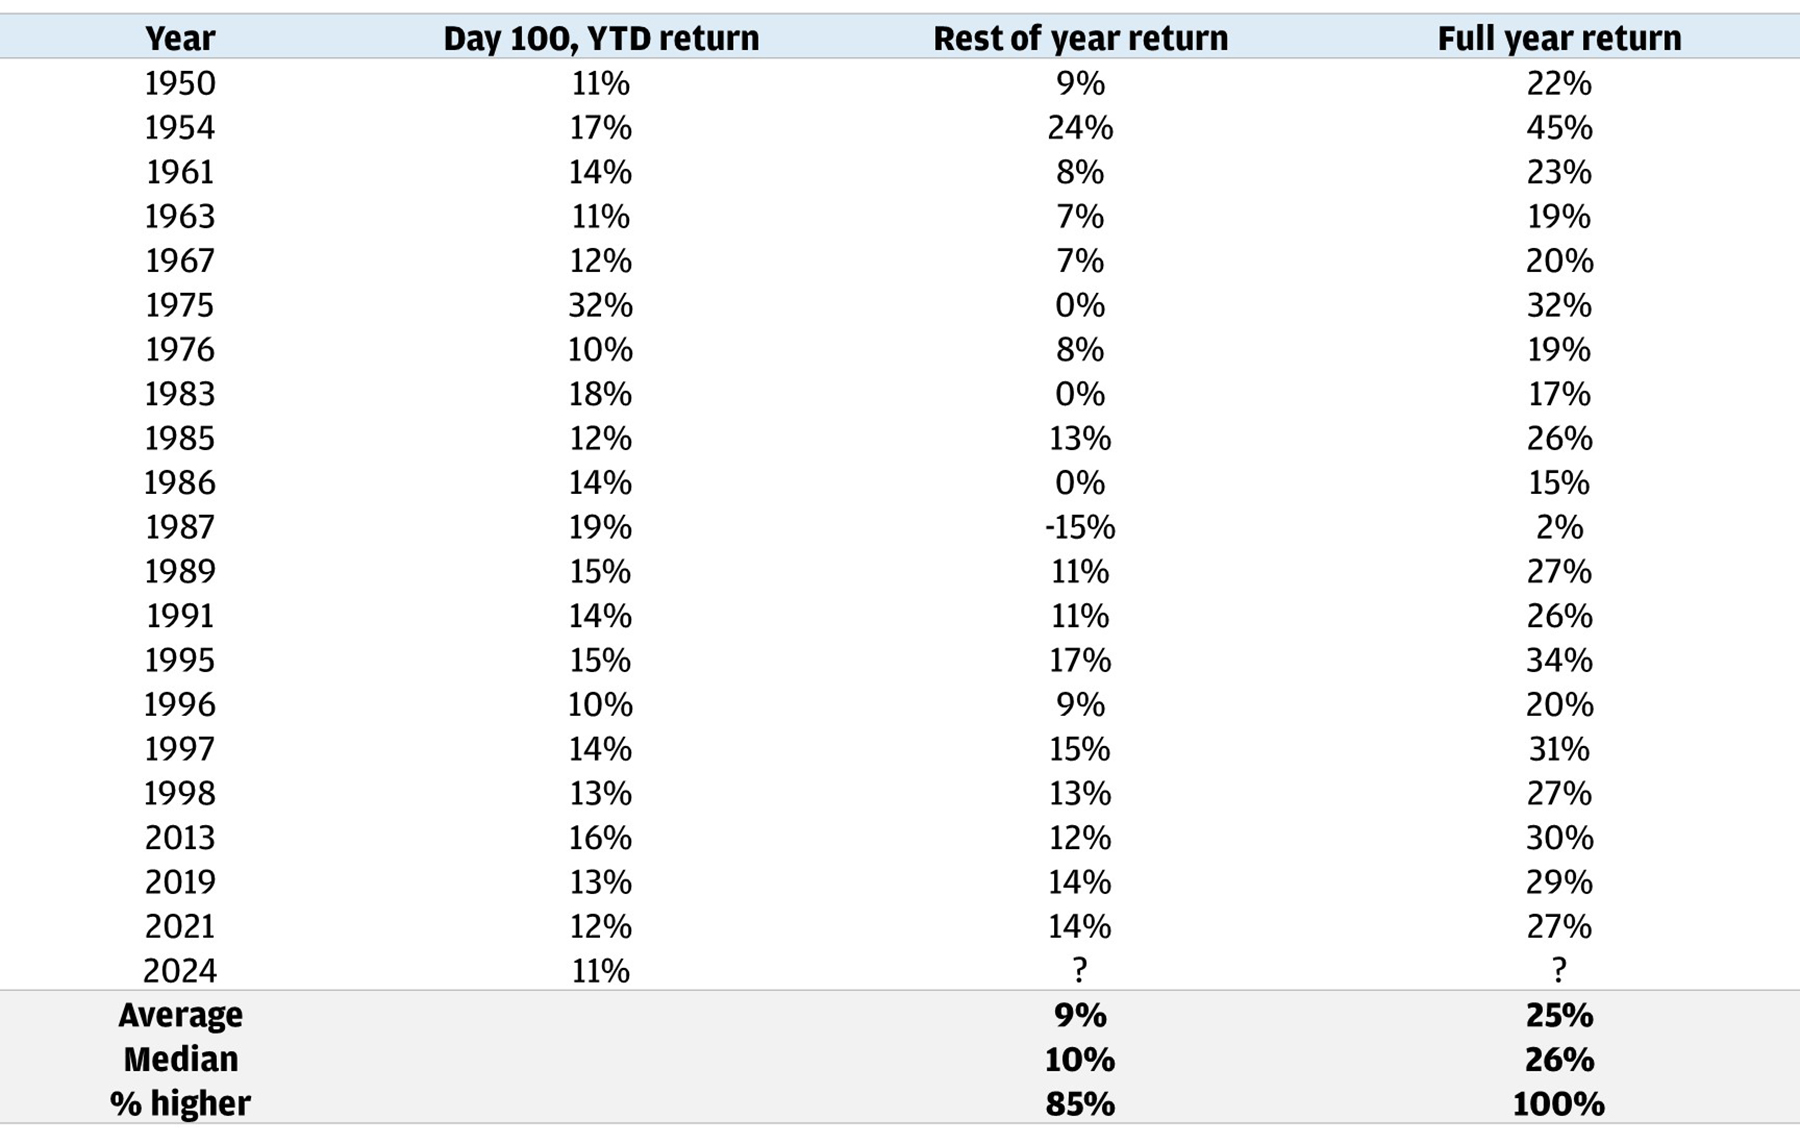 100 days in: Strong returns tend to signal more strength ahead